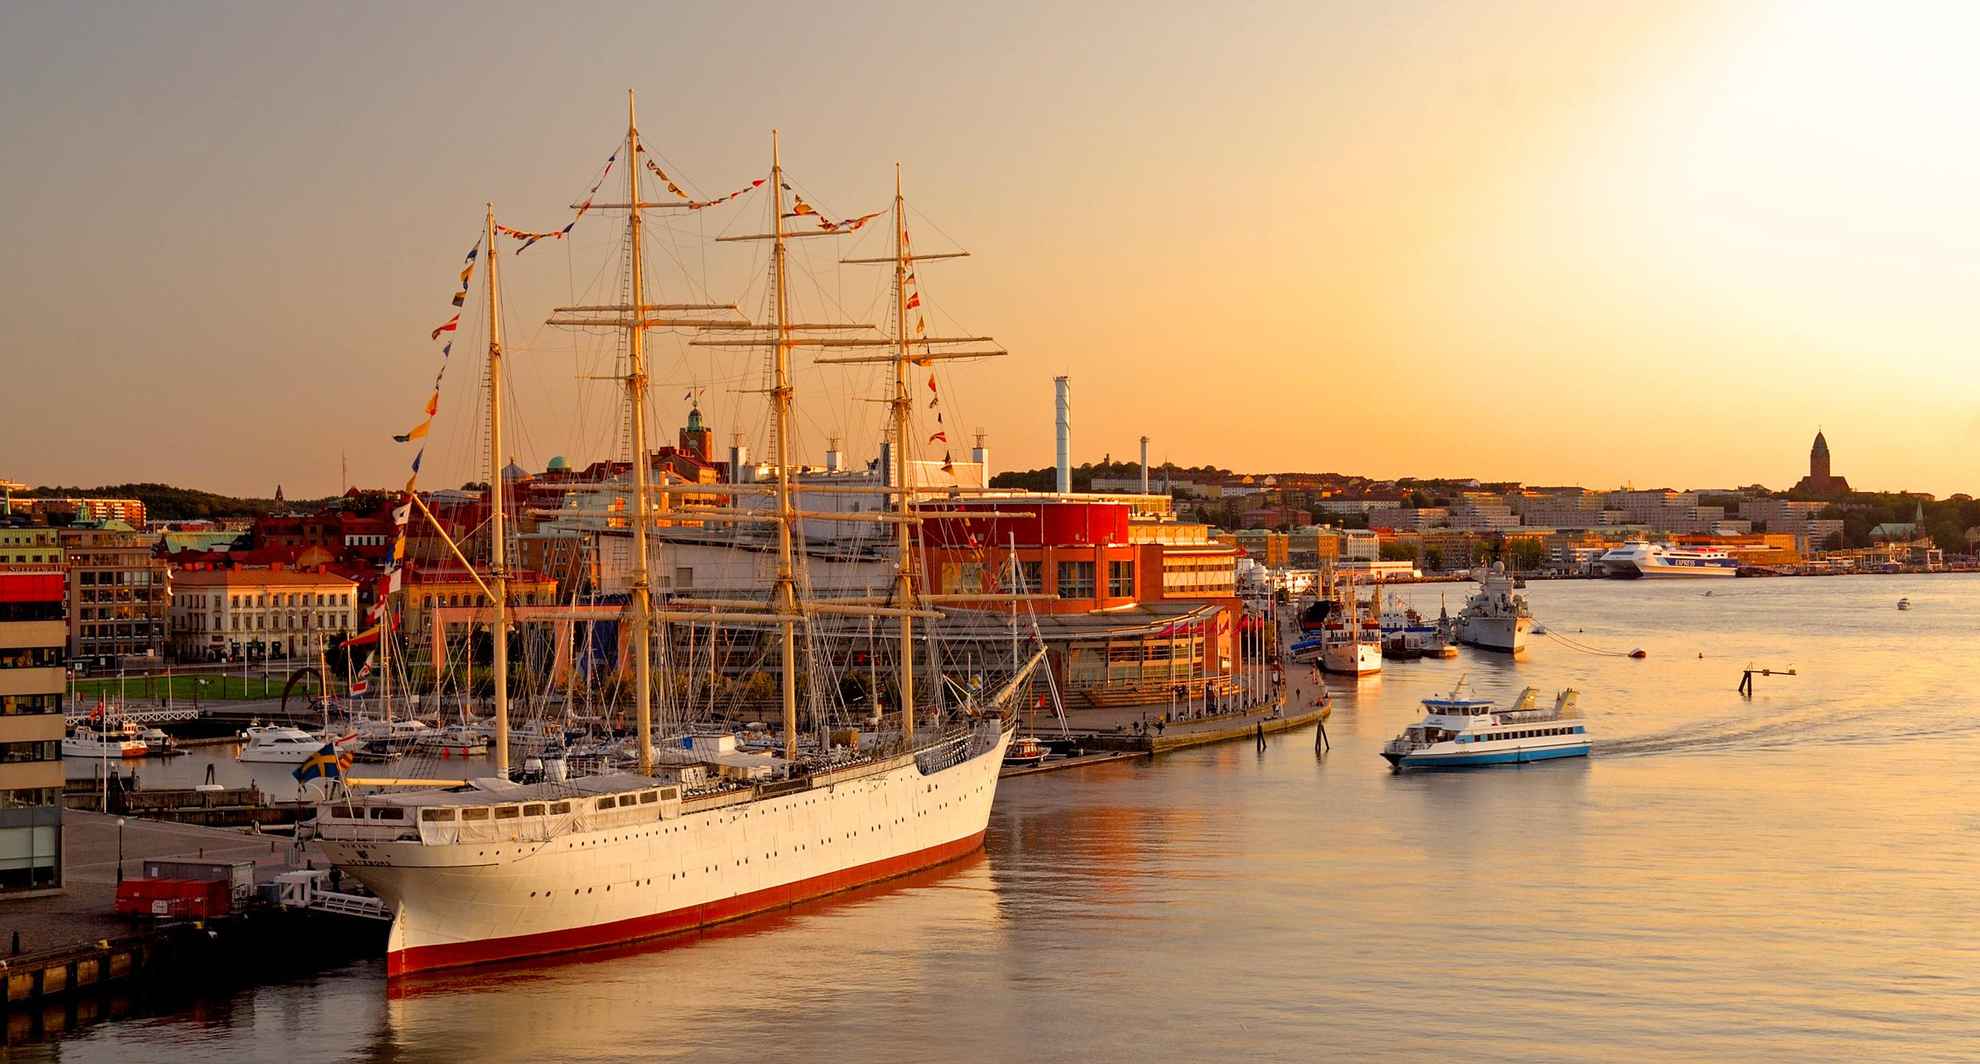 Sunset by the Gothenburg Harbour with large sailing ships, ferries and other boats.